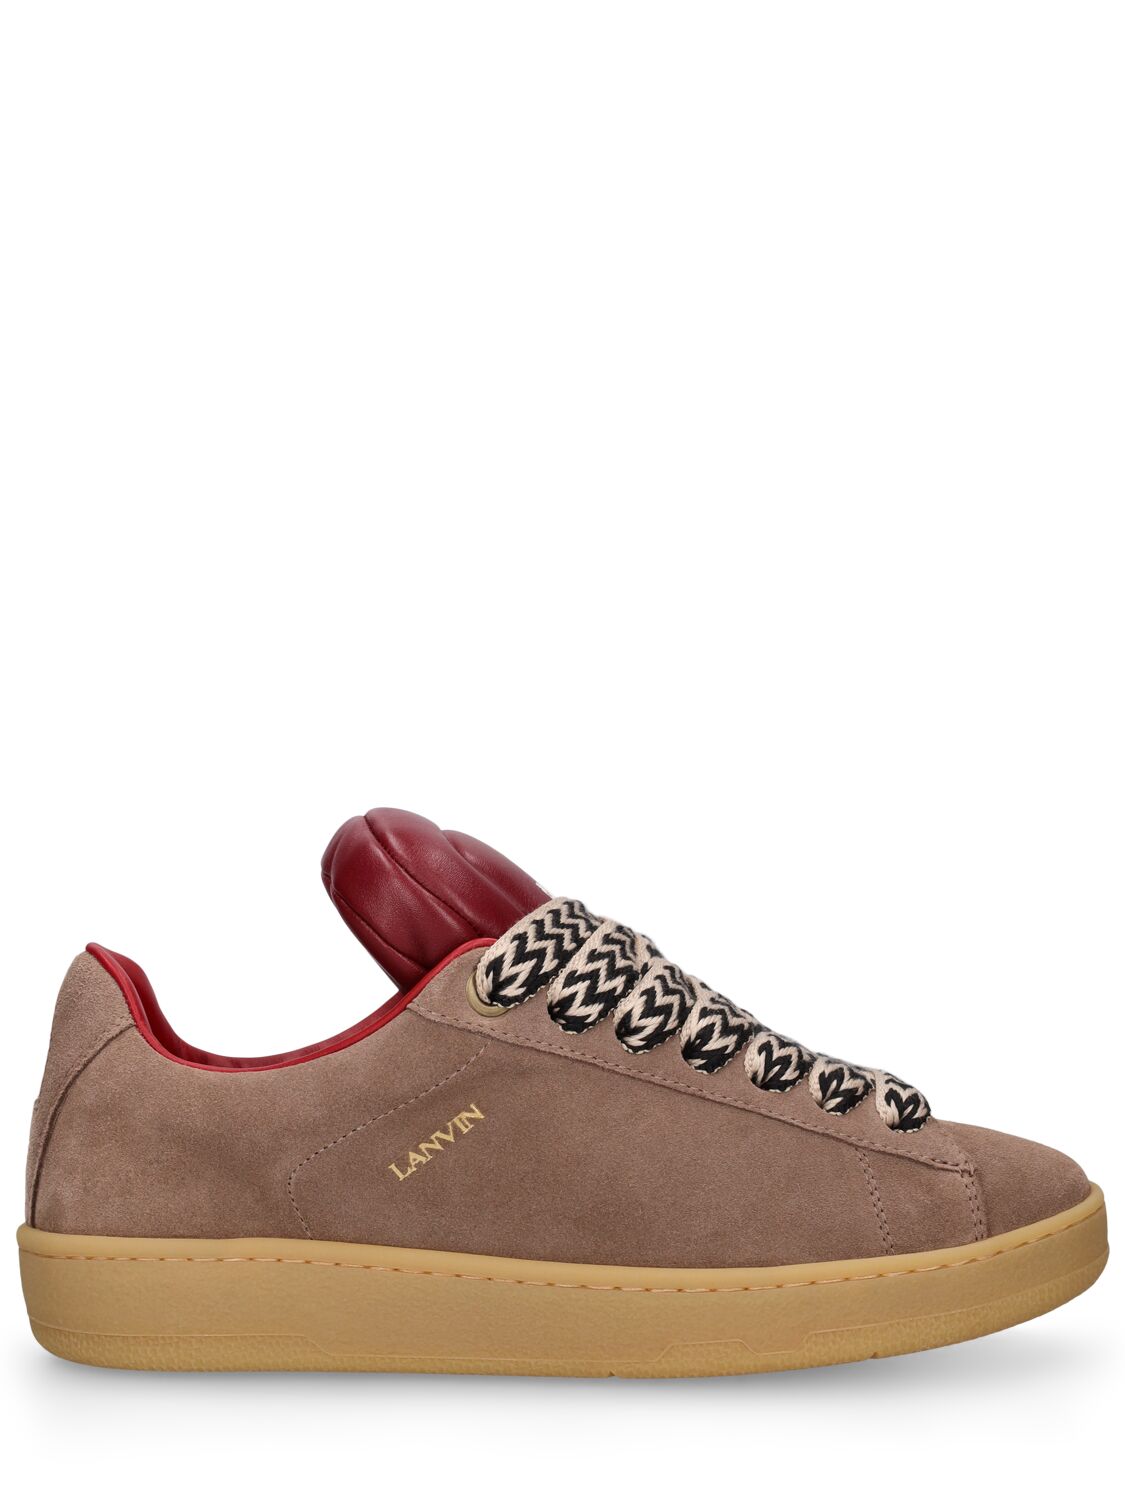 Lanvin Curb Lite Suede Trainers In Brown